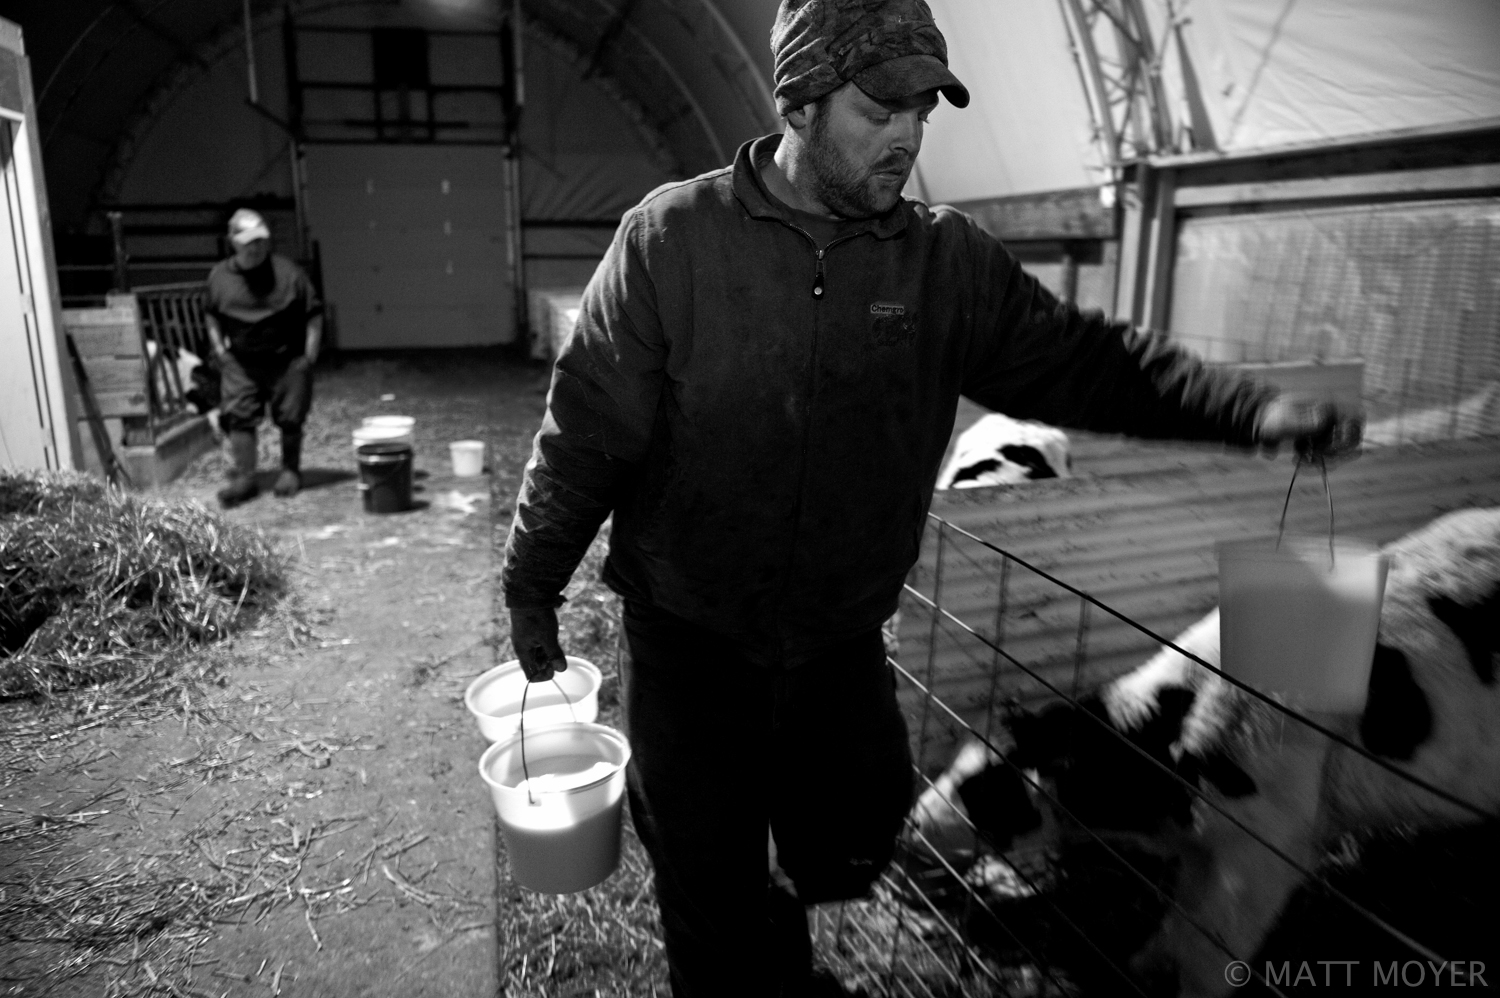  d Tidd, right, prepares to feed calves as his neighbor, John Miller looks on at the Tidd farm in Auburn, NY. 